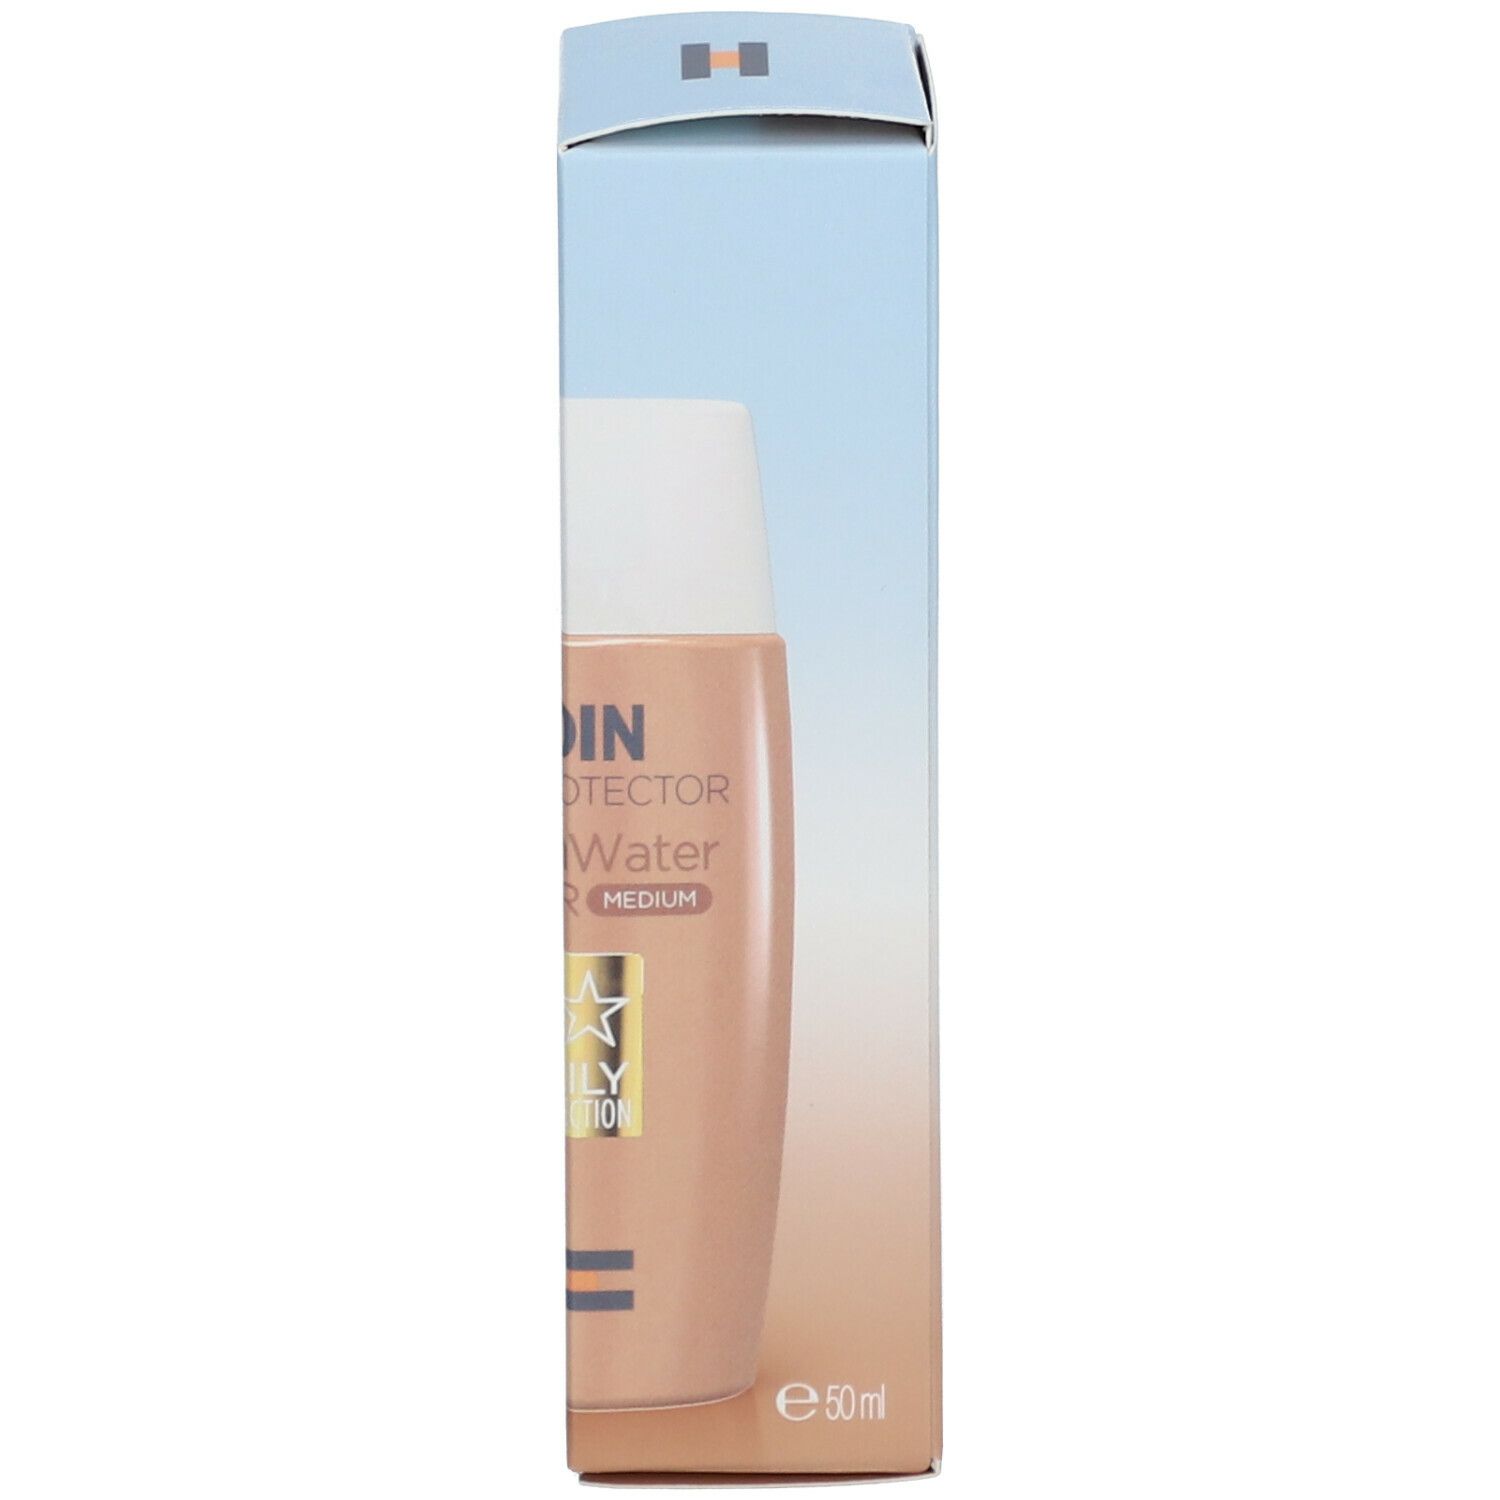 Fotoprotector ISDIN Fusion Water Color SPF 50